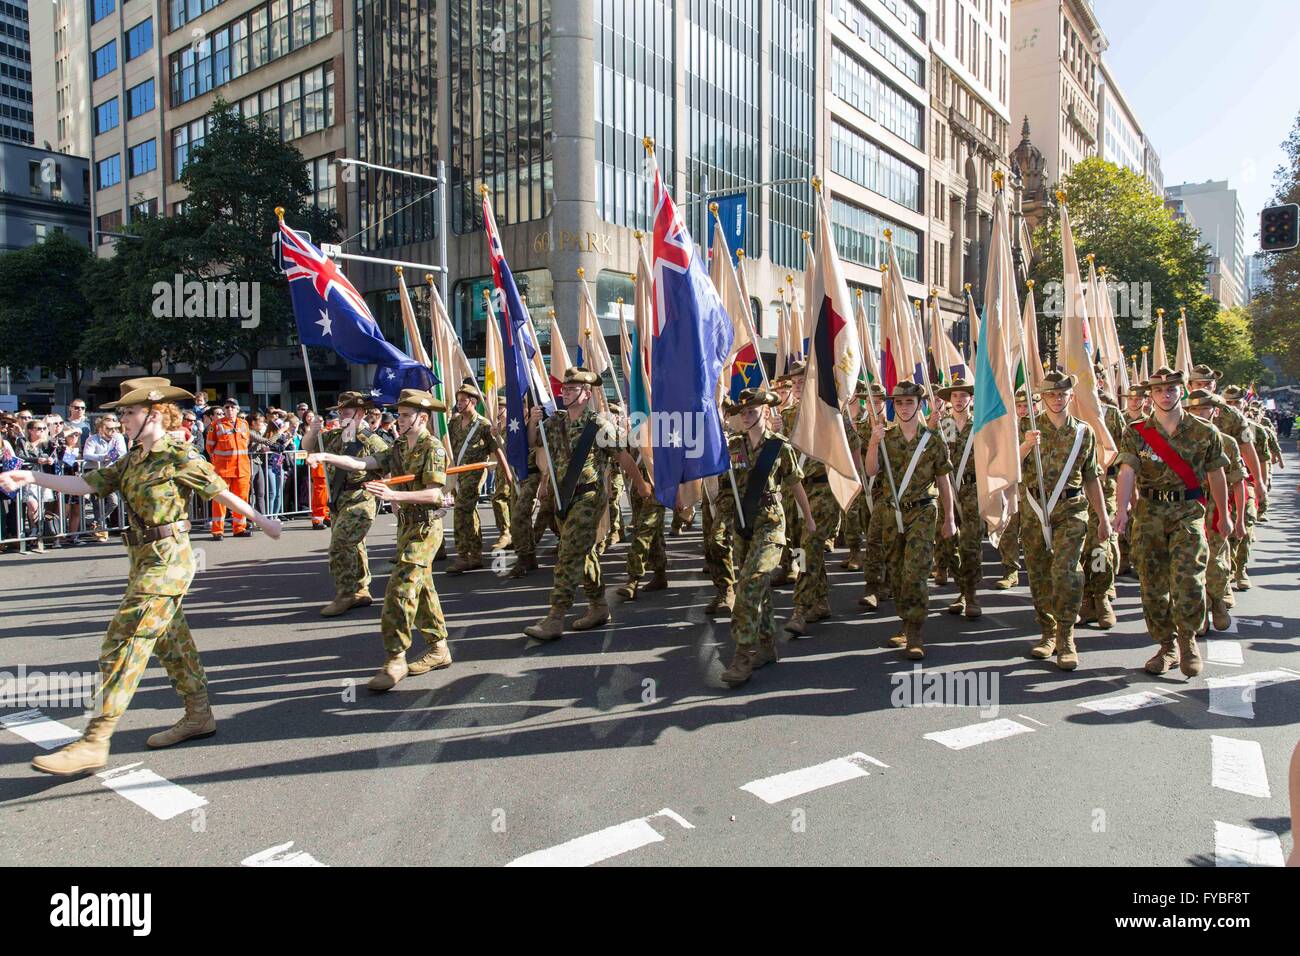 Sydney. 25th Apr, 2016. Photo taken on April 25, 2016 shows a parade team during the ANZAC Day Parade in Sydney, Australia. ANZAC Day is a national day of remembrance in Australia and New Zealand originally to honor the members of the Australian and New Zealand Army Corps (ANZAC) who fought at Gallipoli during World War I but now more to commemorate all those who served and died in military operations for their countries. Credit:  Zhu Hongye/Xinhua/Alamy Live News Stock Photo